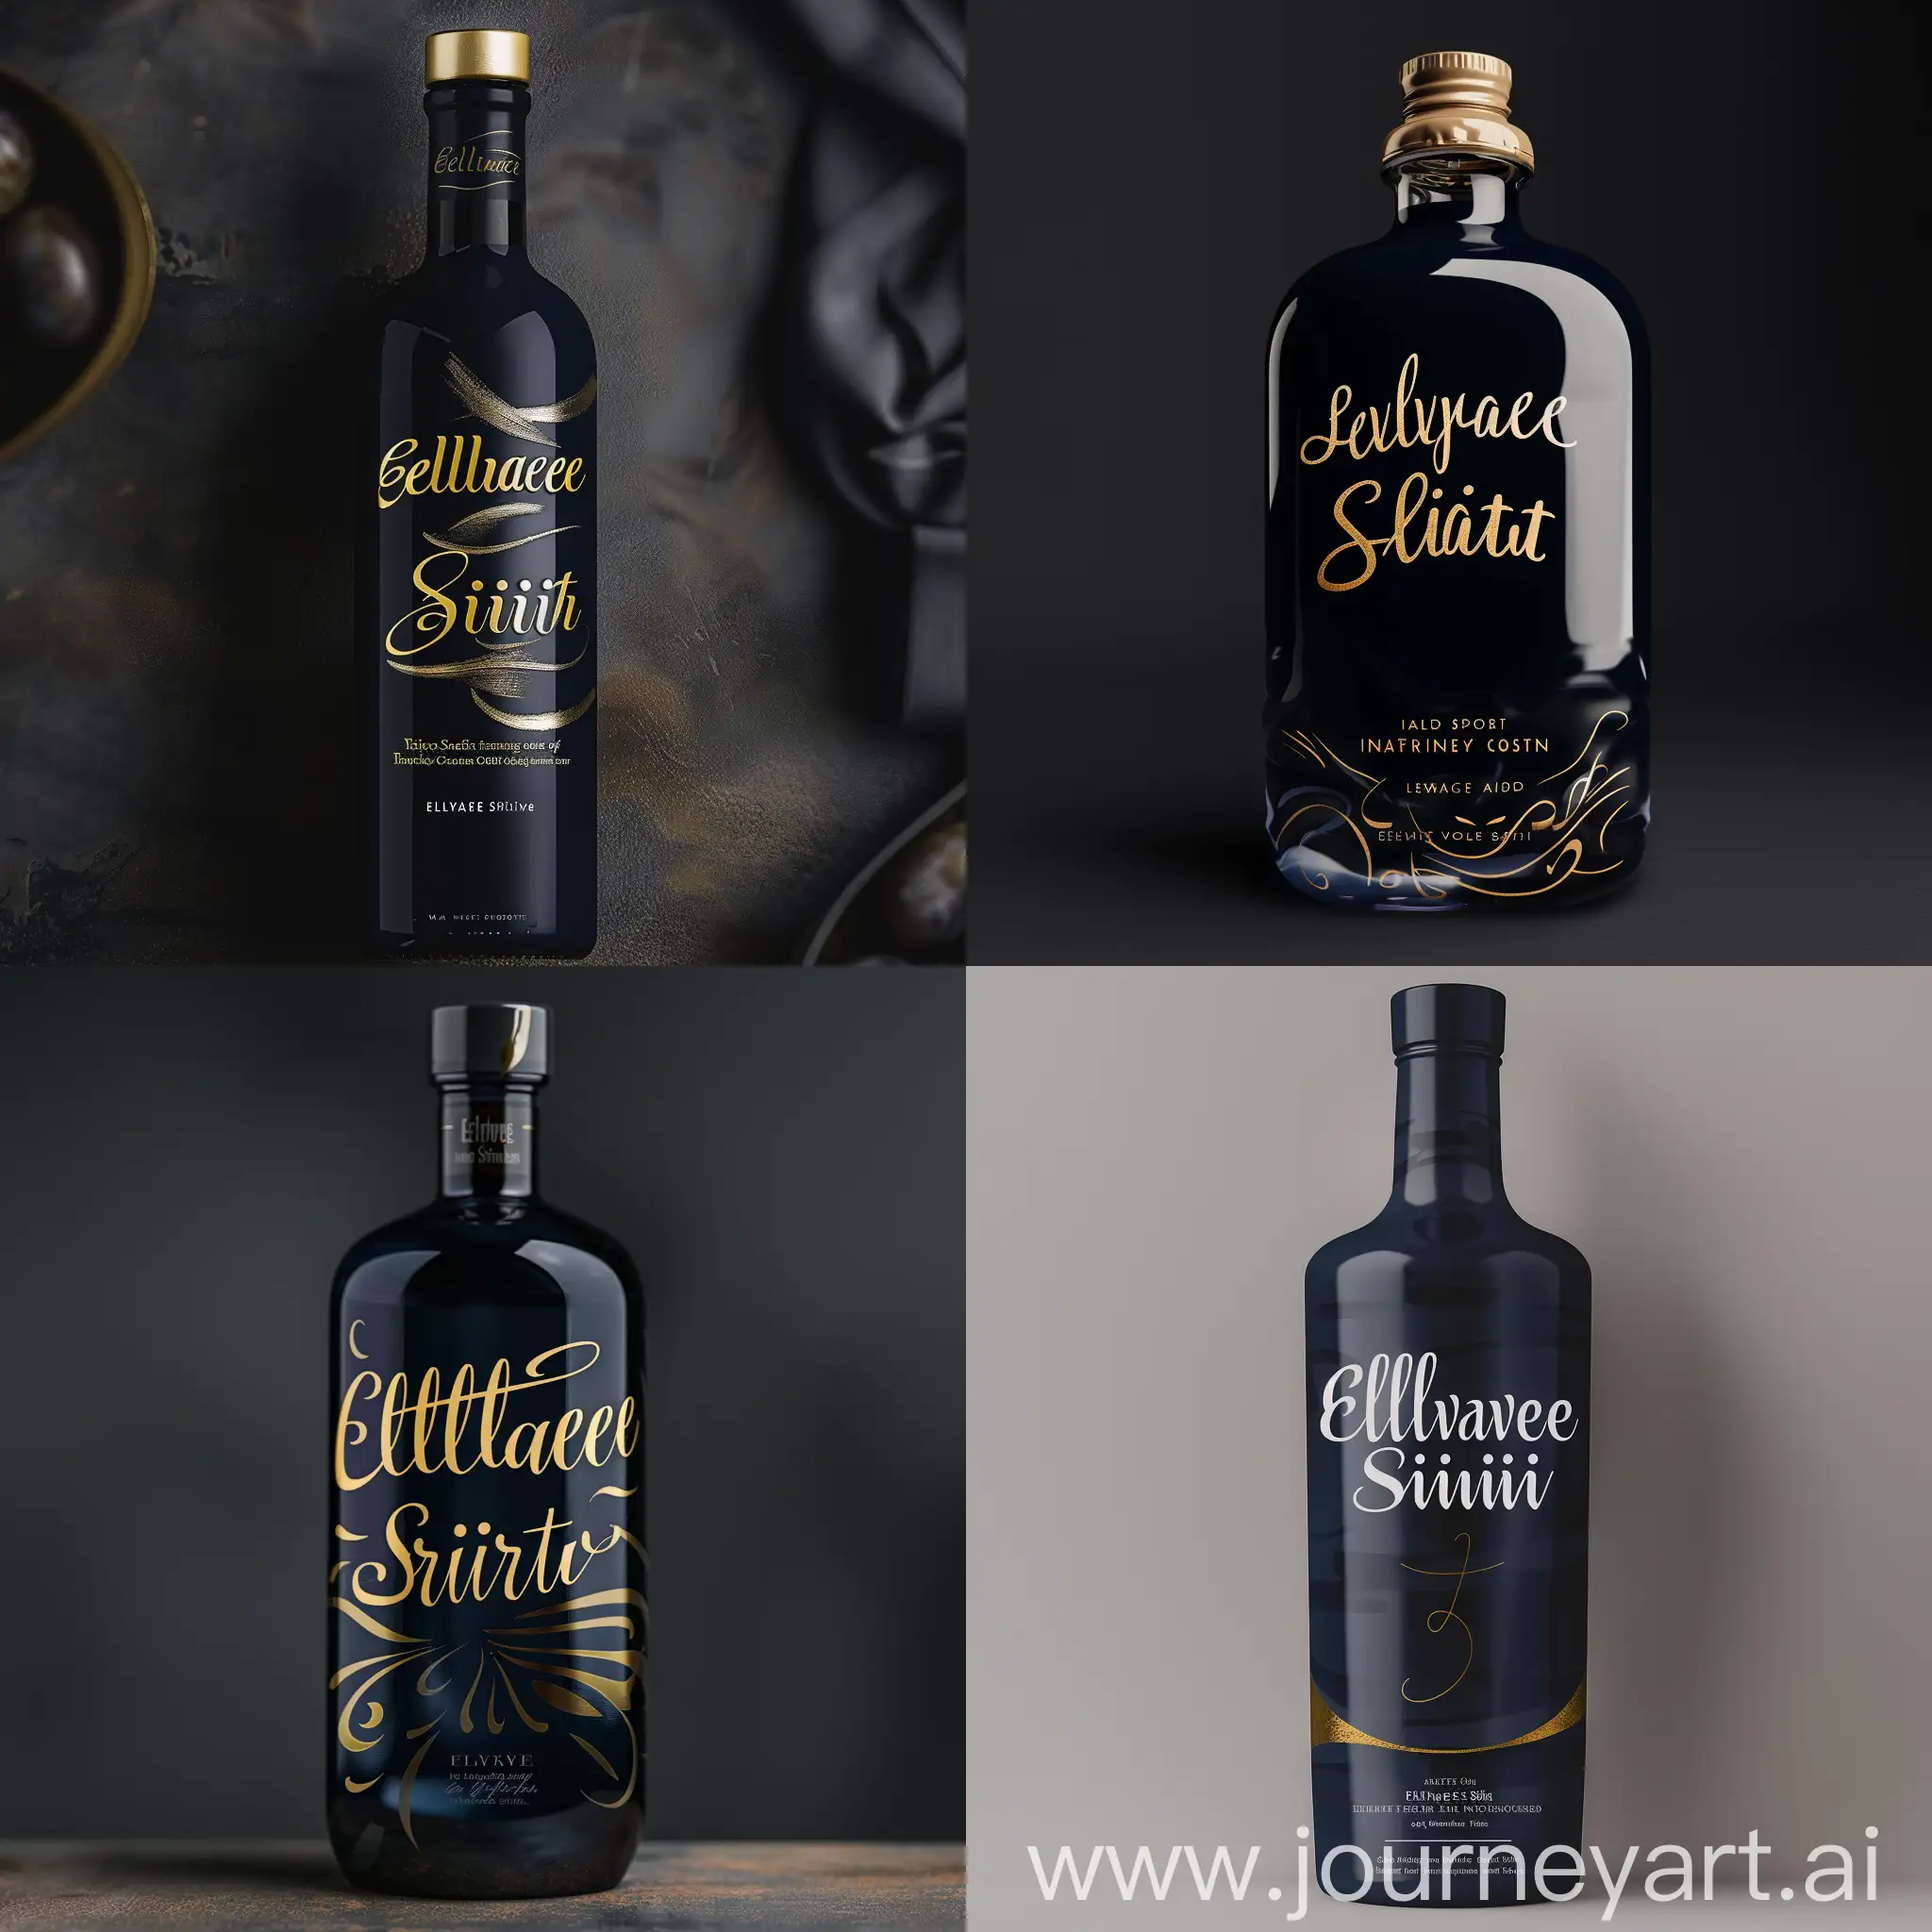 Elevate-Spirit-Premium-NonAlcoholic-Beverage-in-Sleek-Navy-Blue-and-Gold-Packaging